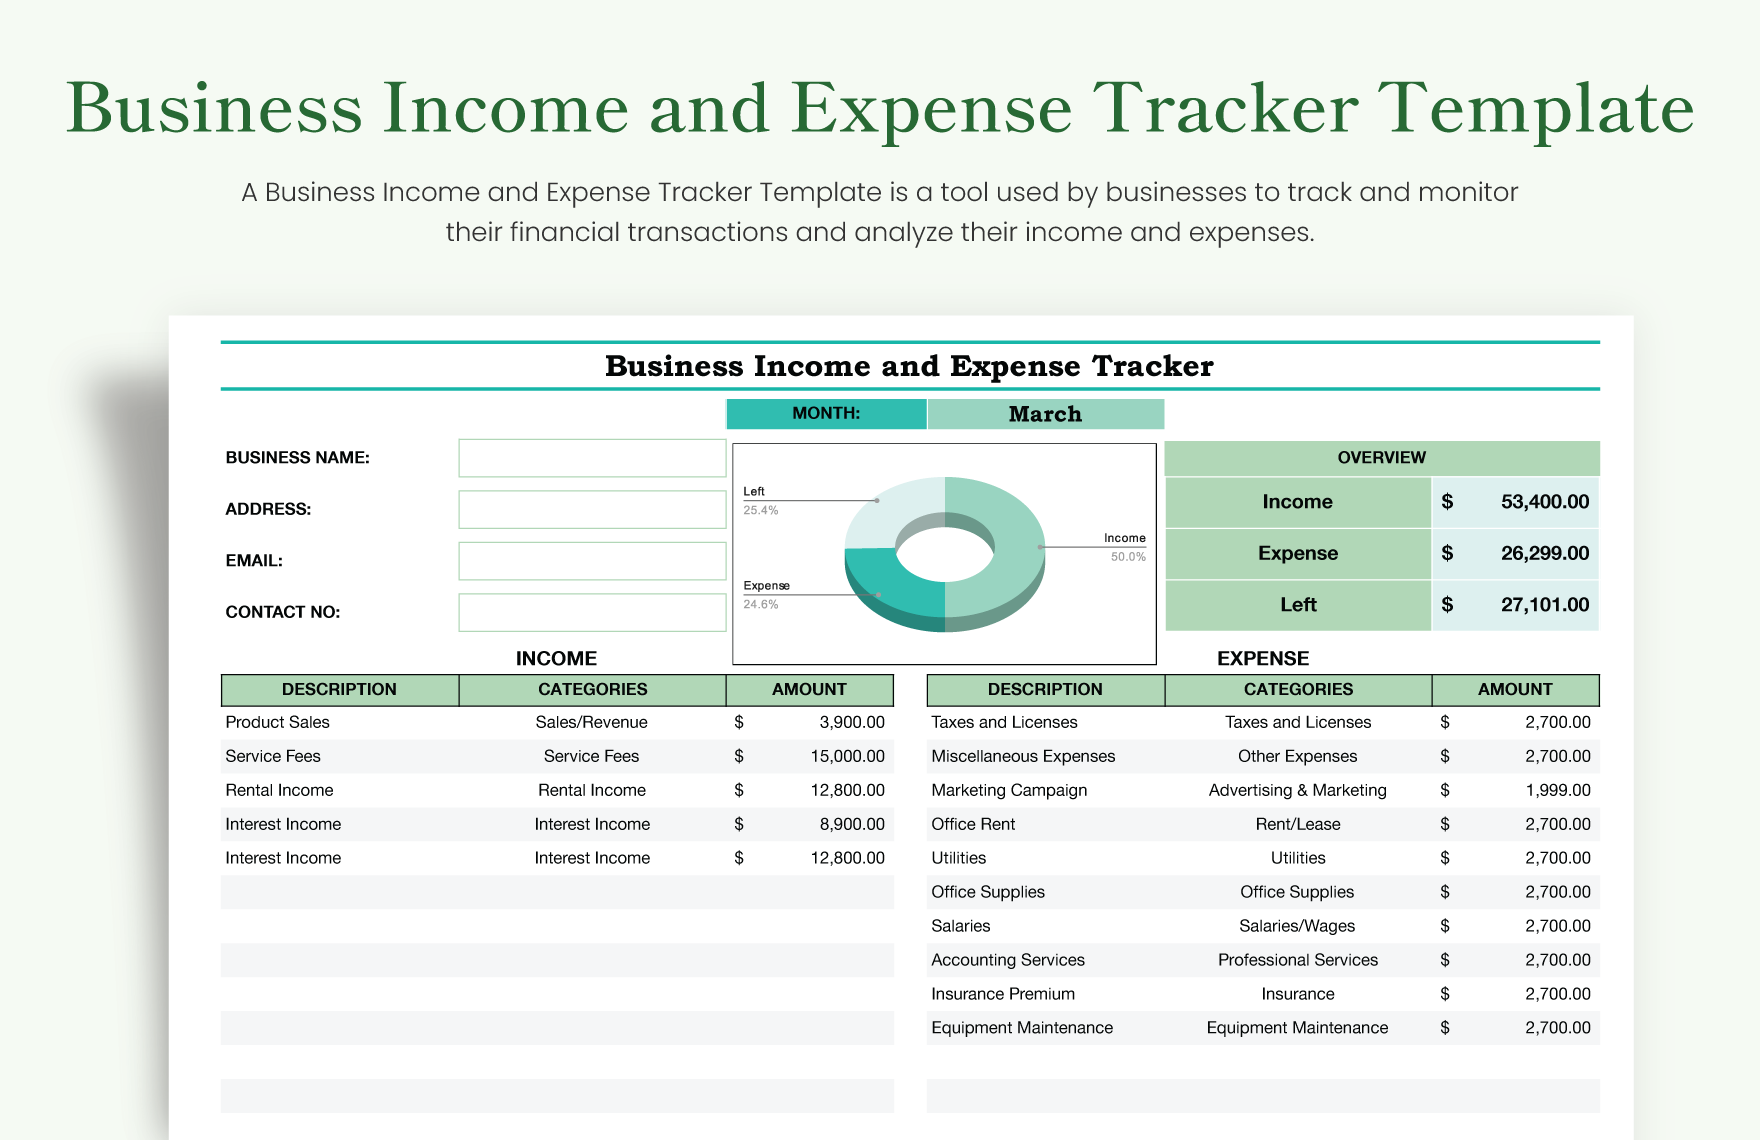 Business Income and Expense Tracker Template